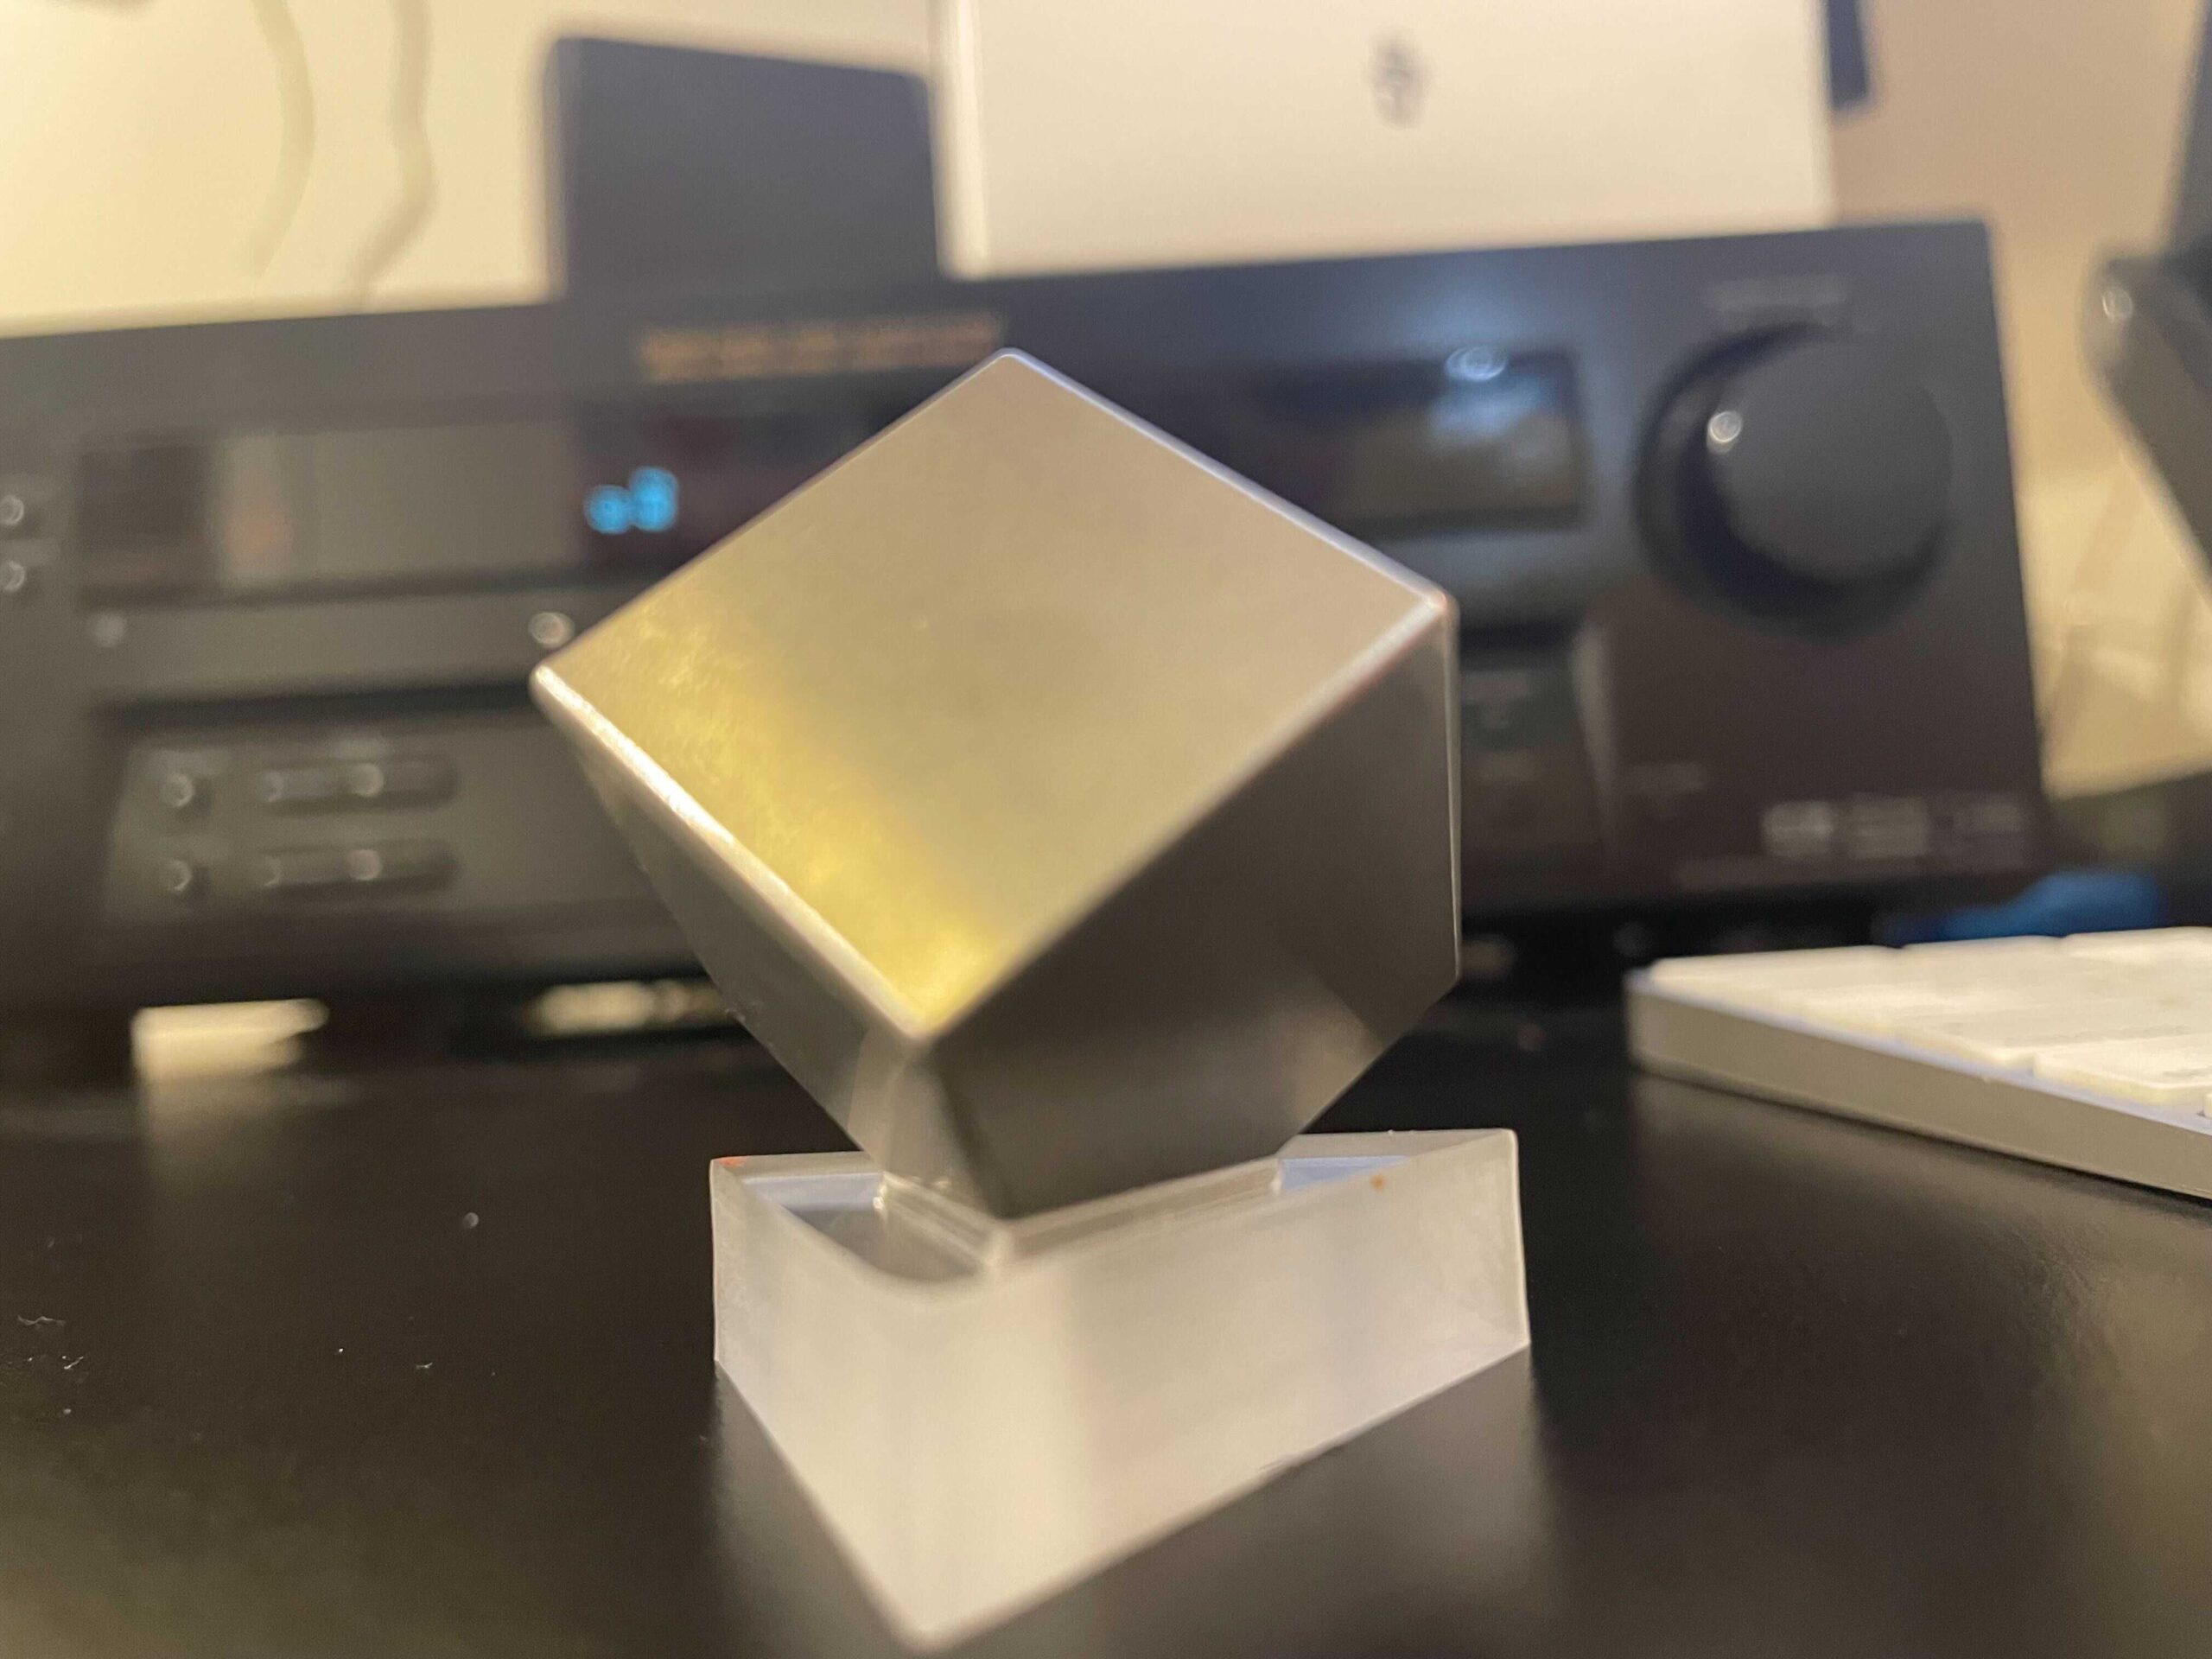 That-tungsten-company-is-auctioning-its-largest-ever-cube-as-an-nft